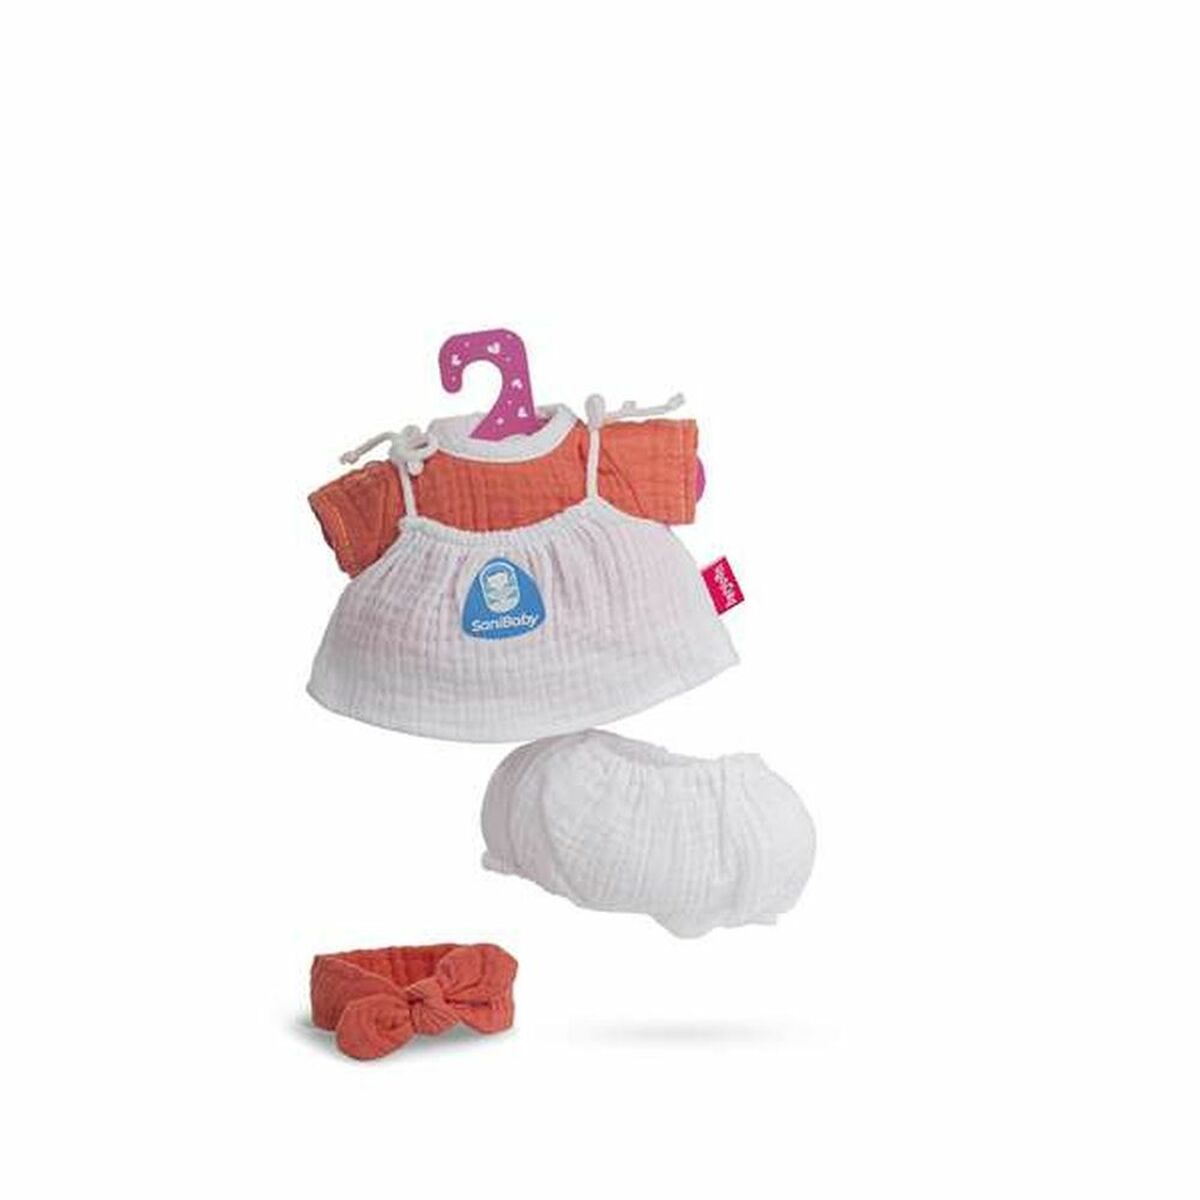 Doll's clothes Berjuan Sanibaby Coral (28 cm) - Little Baby Shop